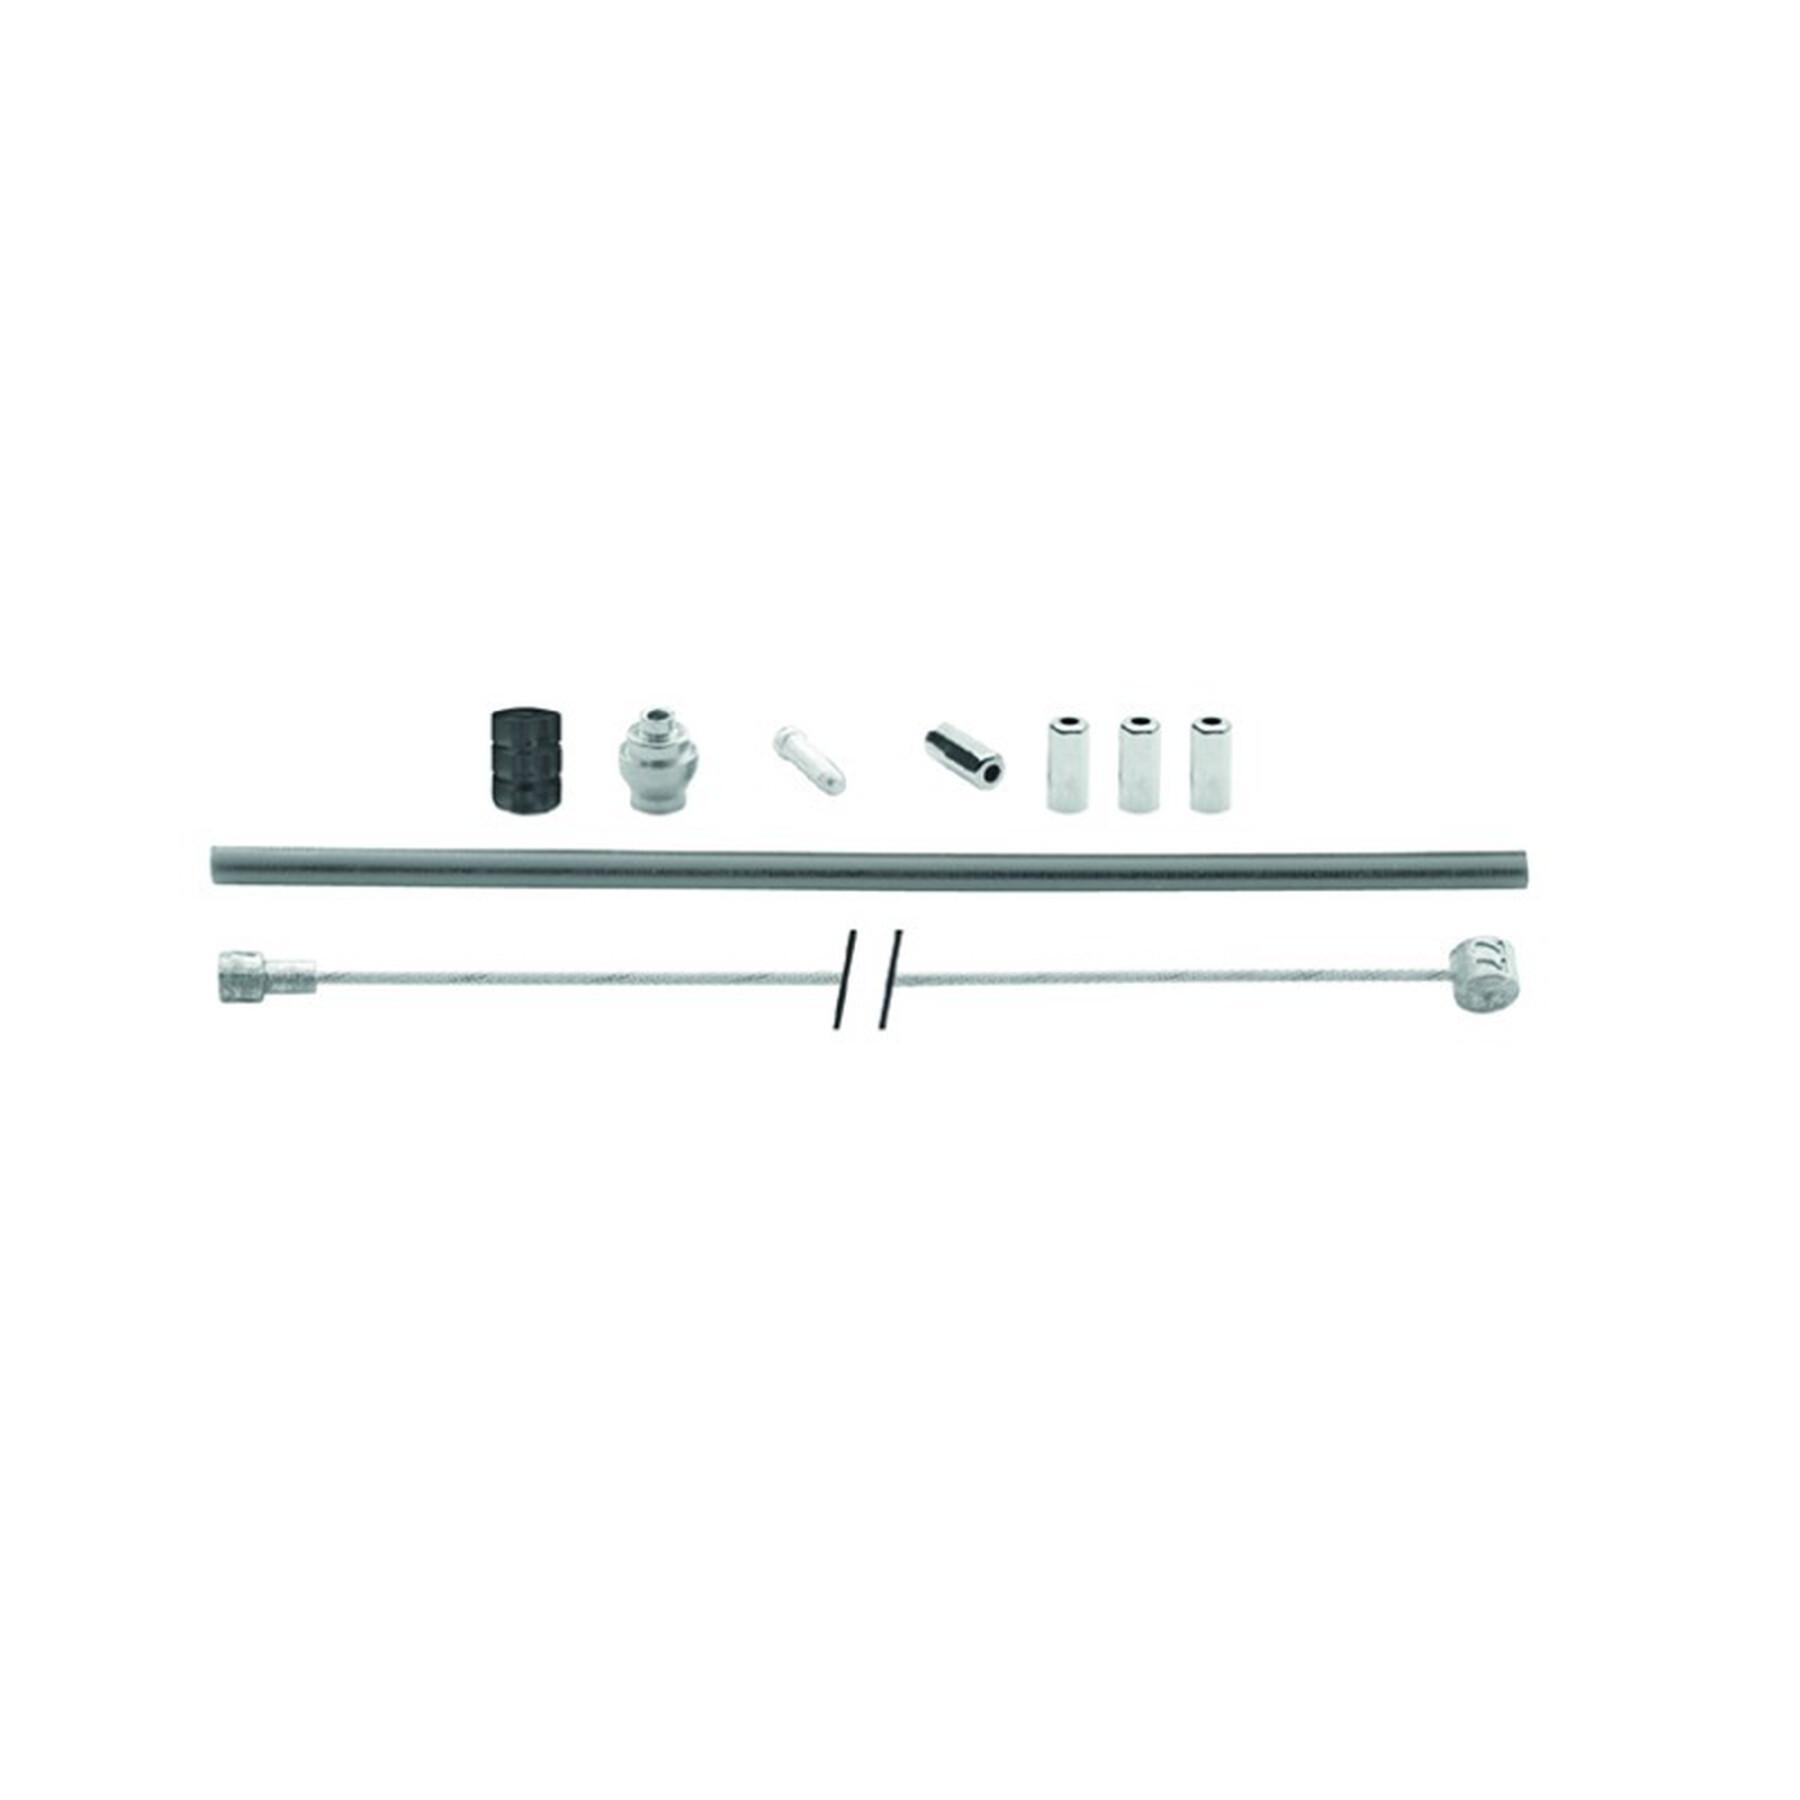 Brake cable kit with double universal fitting and accessory sheath included XLC BR-X91